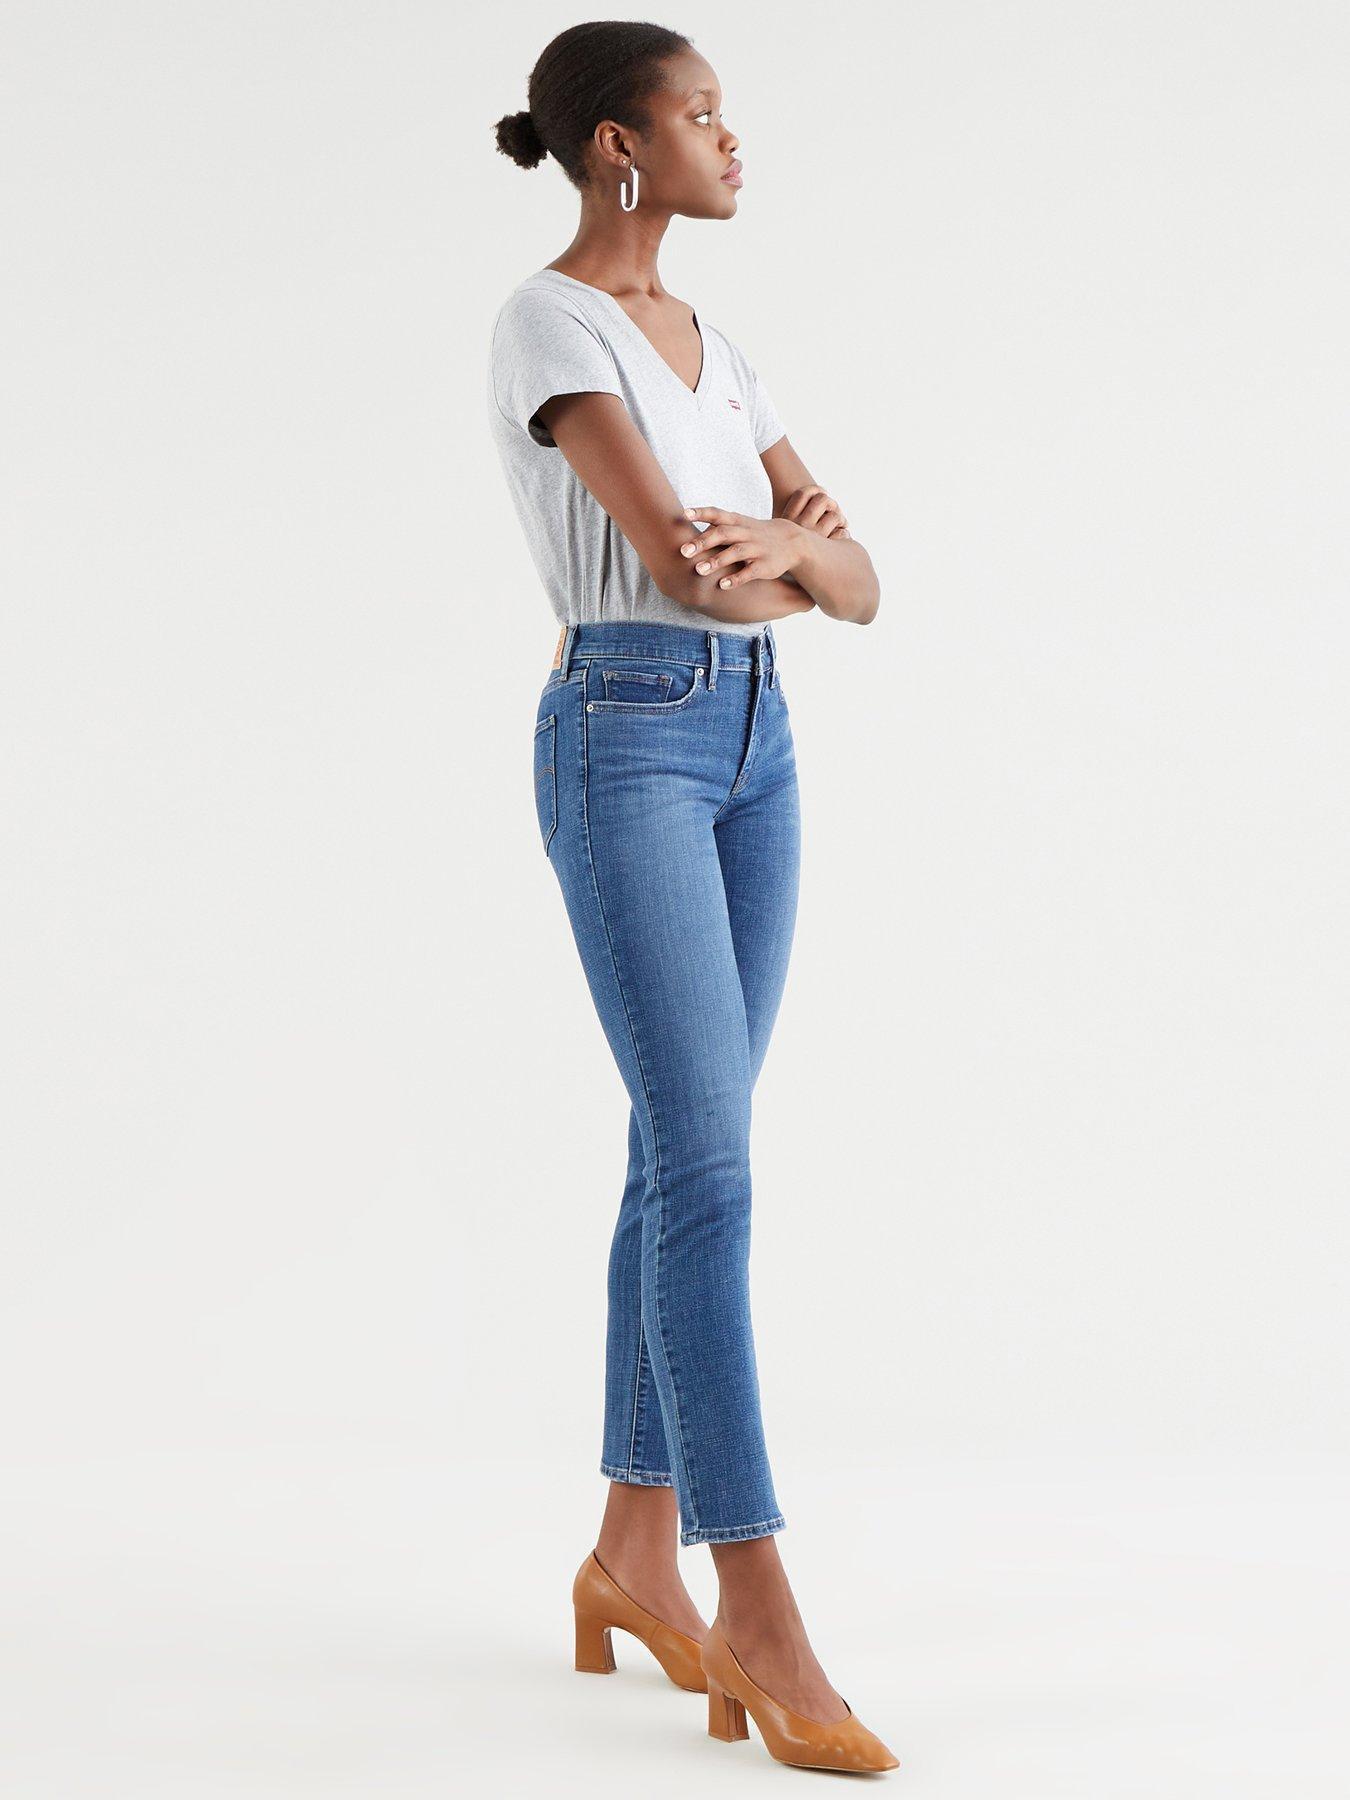 Levi's 312 Shaping Slim Jean - Washed Blue 